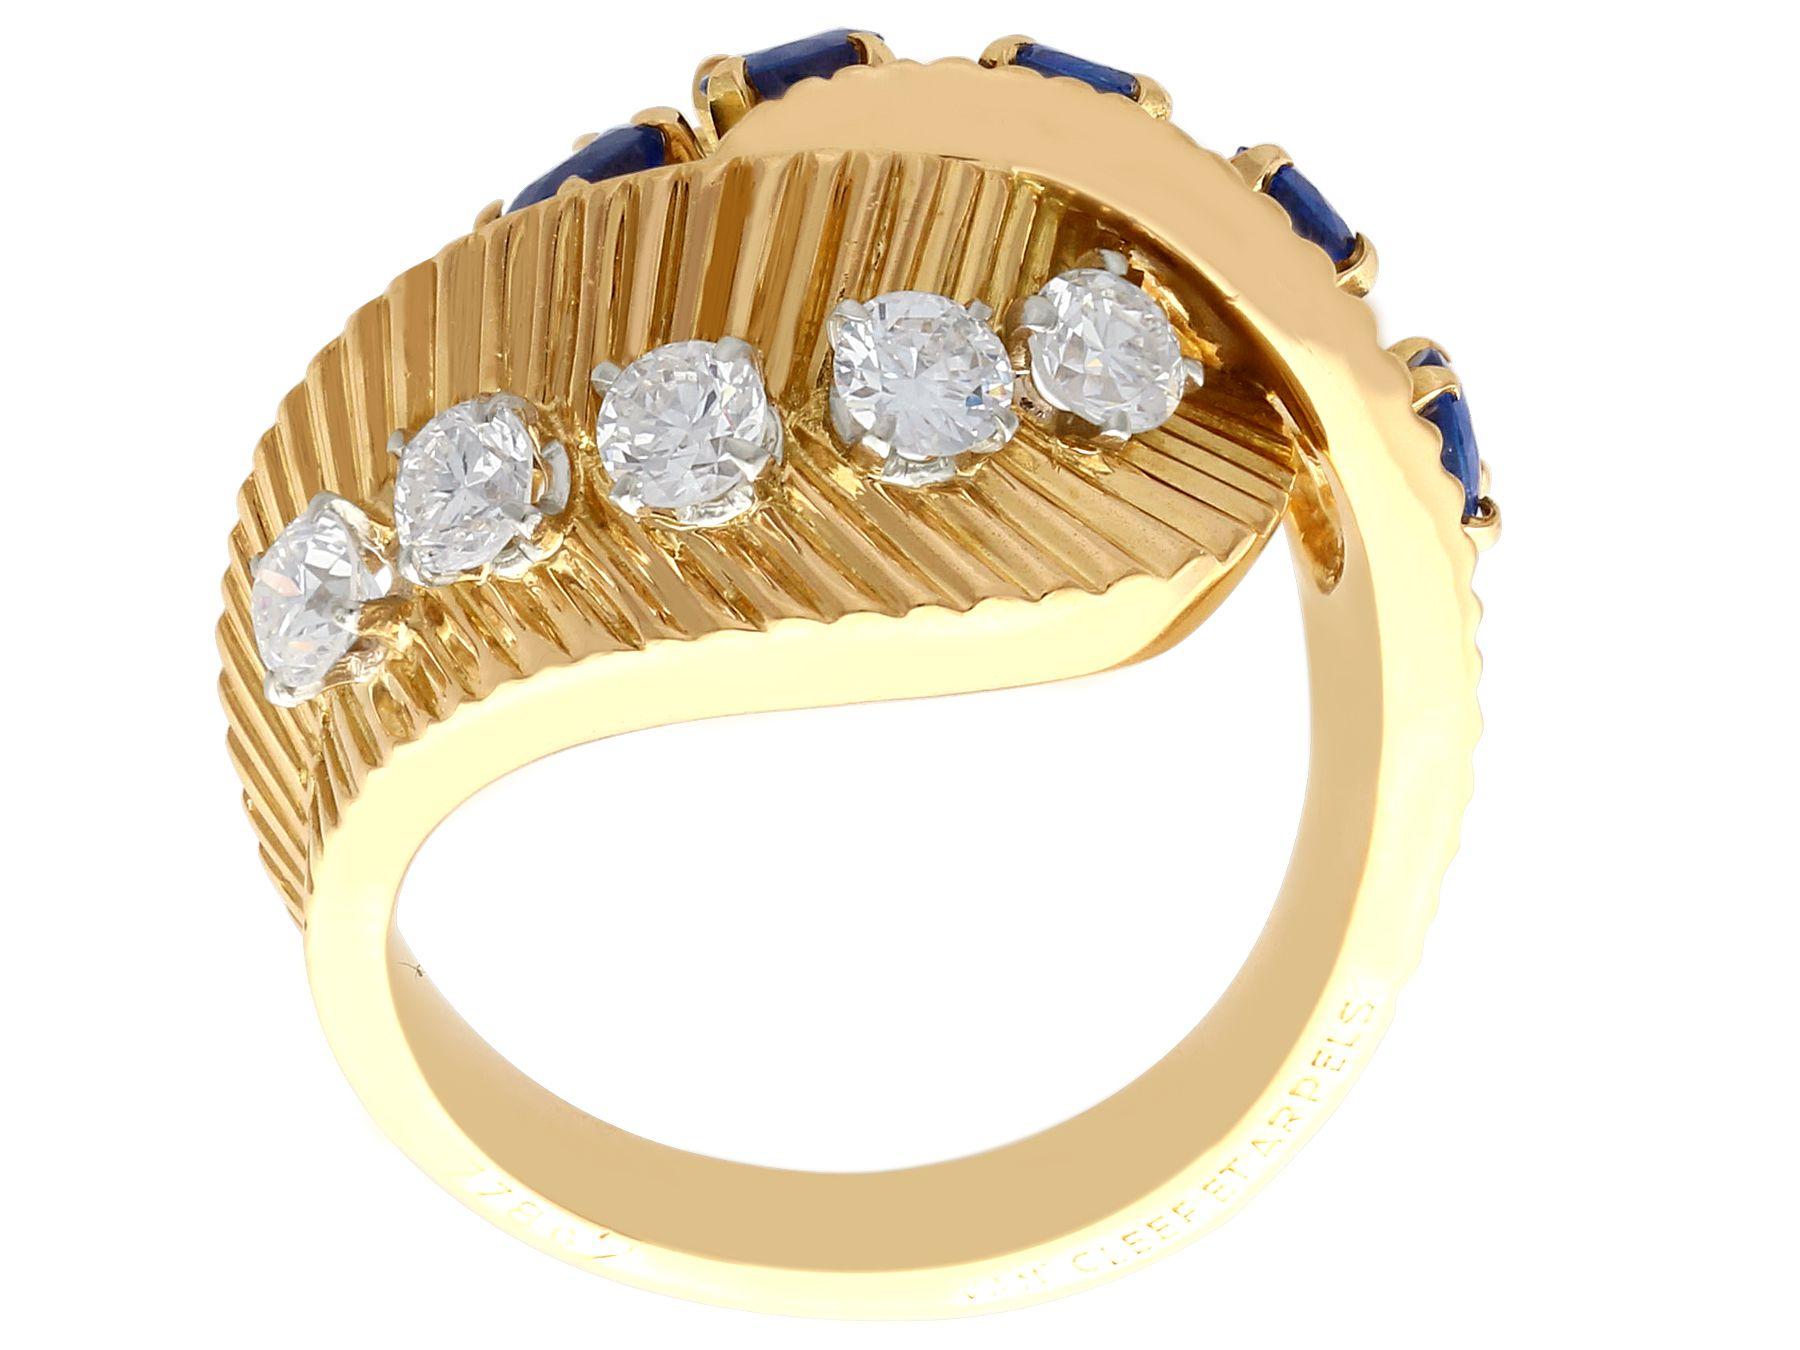 1960s Sapphire and Diamond Yellow Gold Ring by Van Cleef & Arpels In Excellent Condition For Sale In Jesmond, Newcastle Upon Tyne